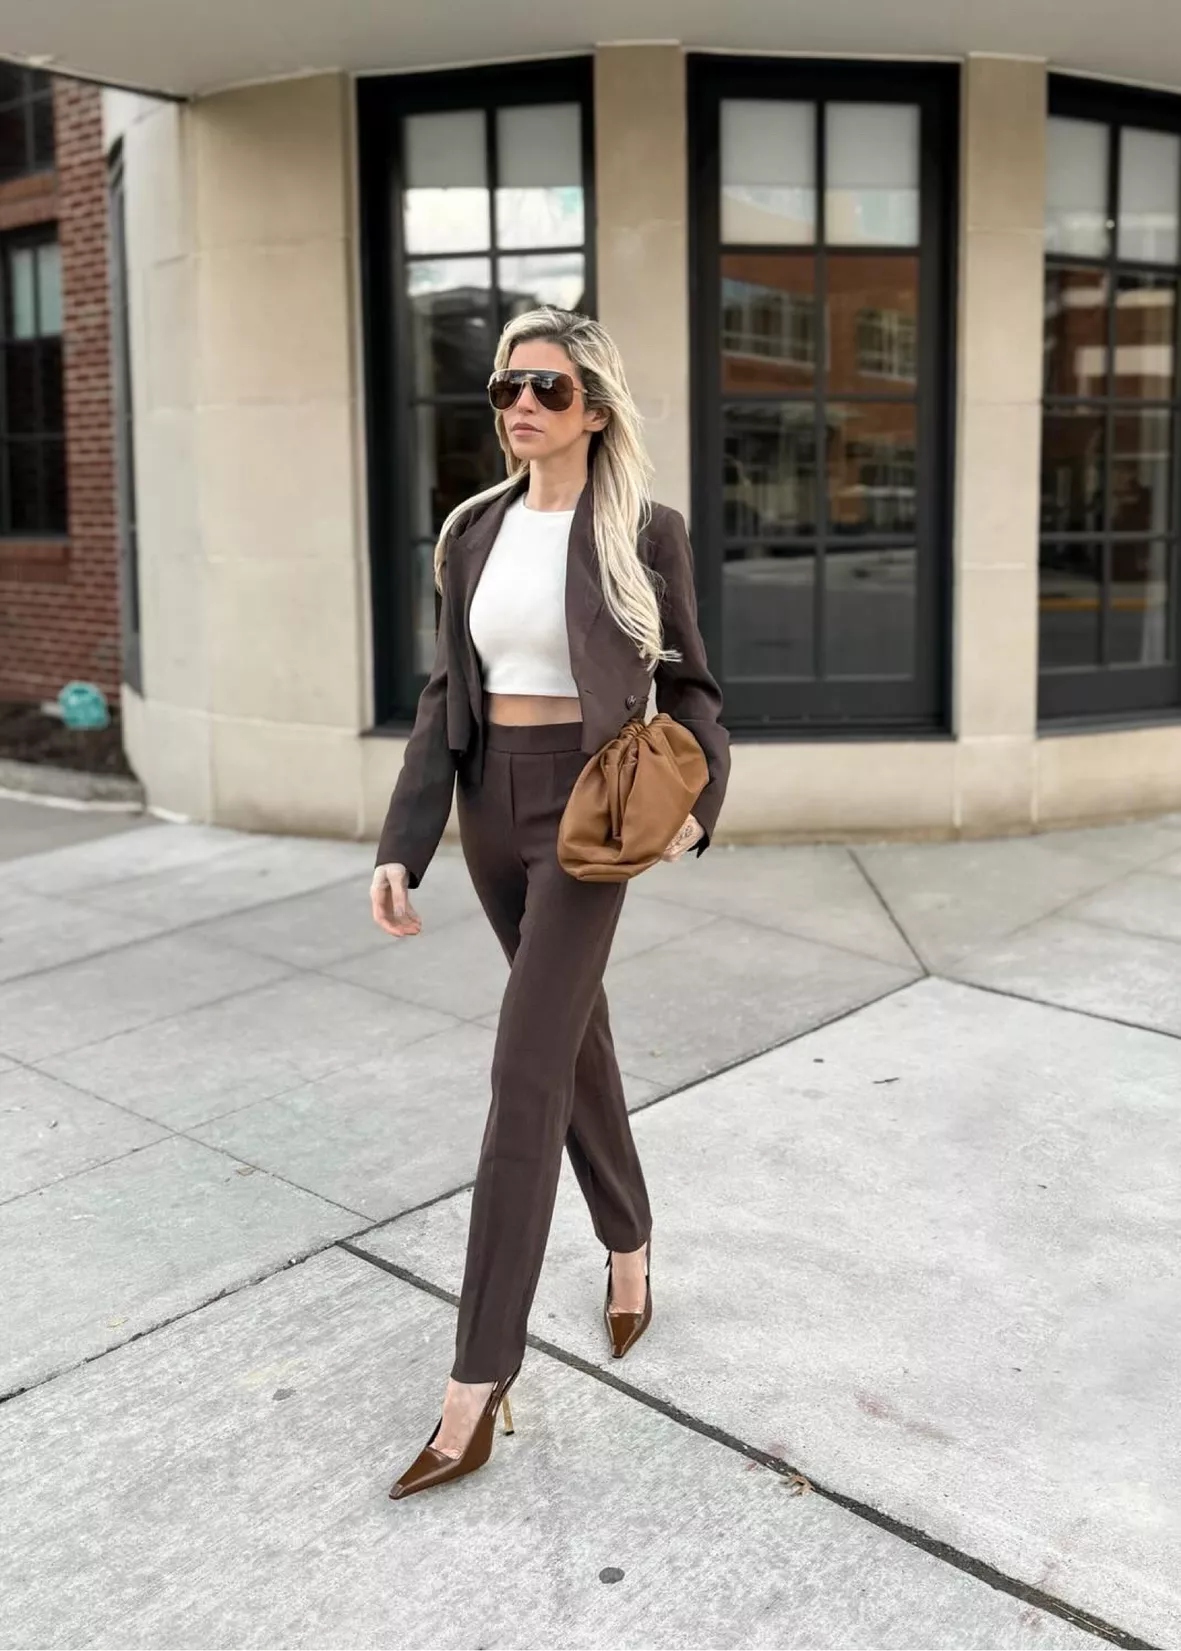 Dark Brown Capri Pants Outfits (2 ideas & outfits)